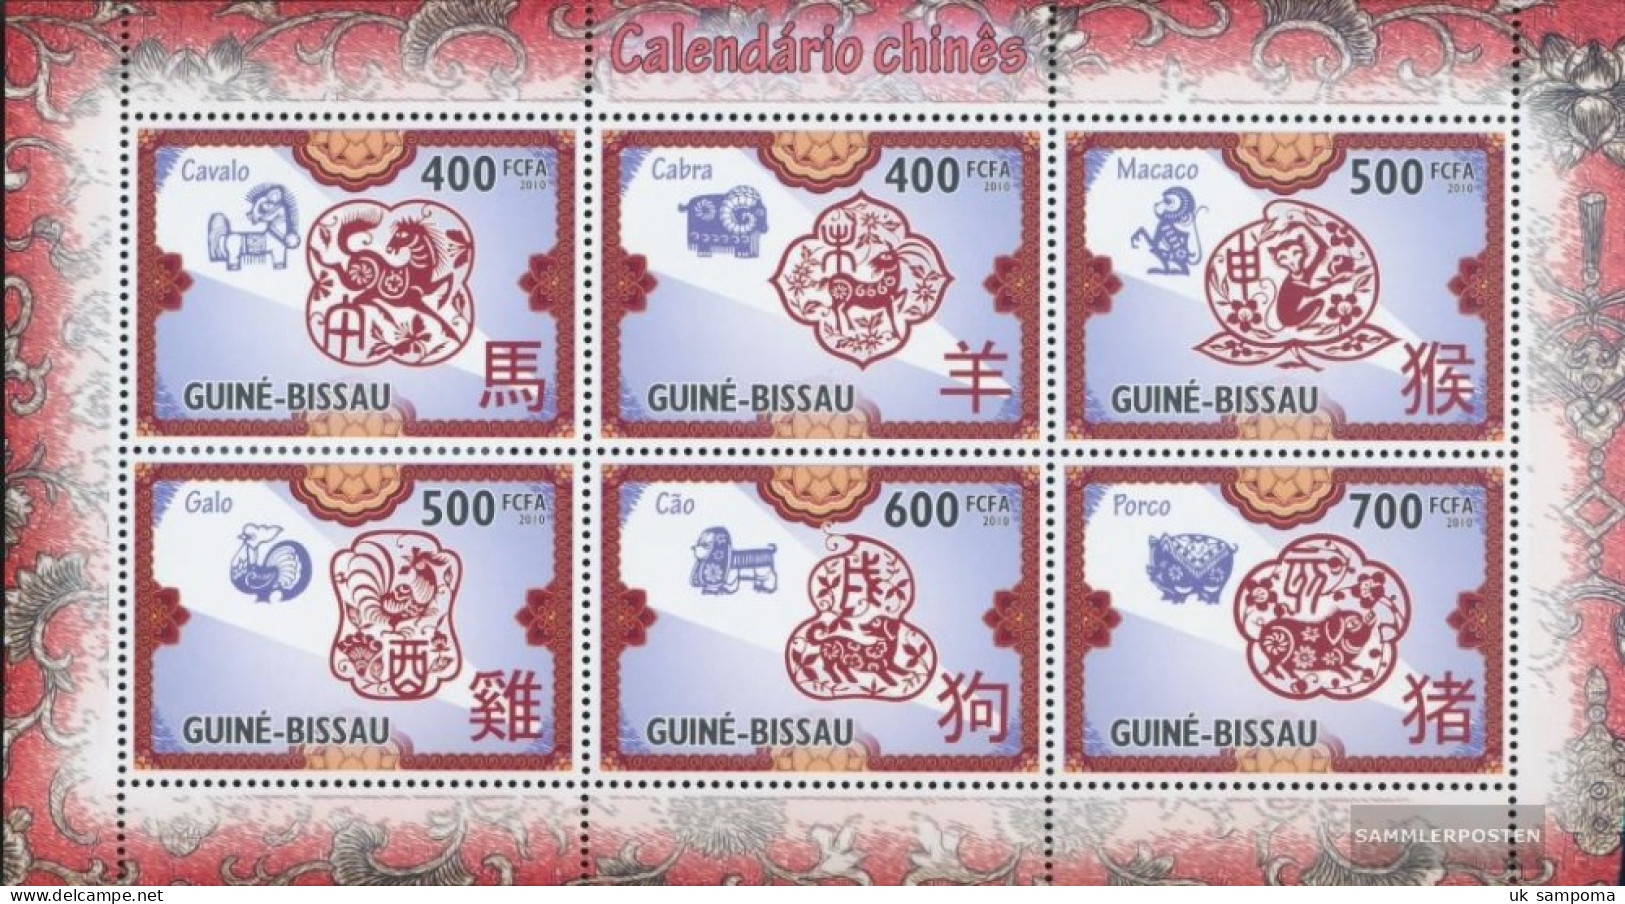 Guinea-Bissau 4779-4784 Sheetlet (complete. Issue) Unmounted Mint / Never Hinged 2010 Chinese Calendar - Guinea-Bissau